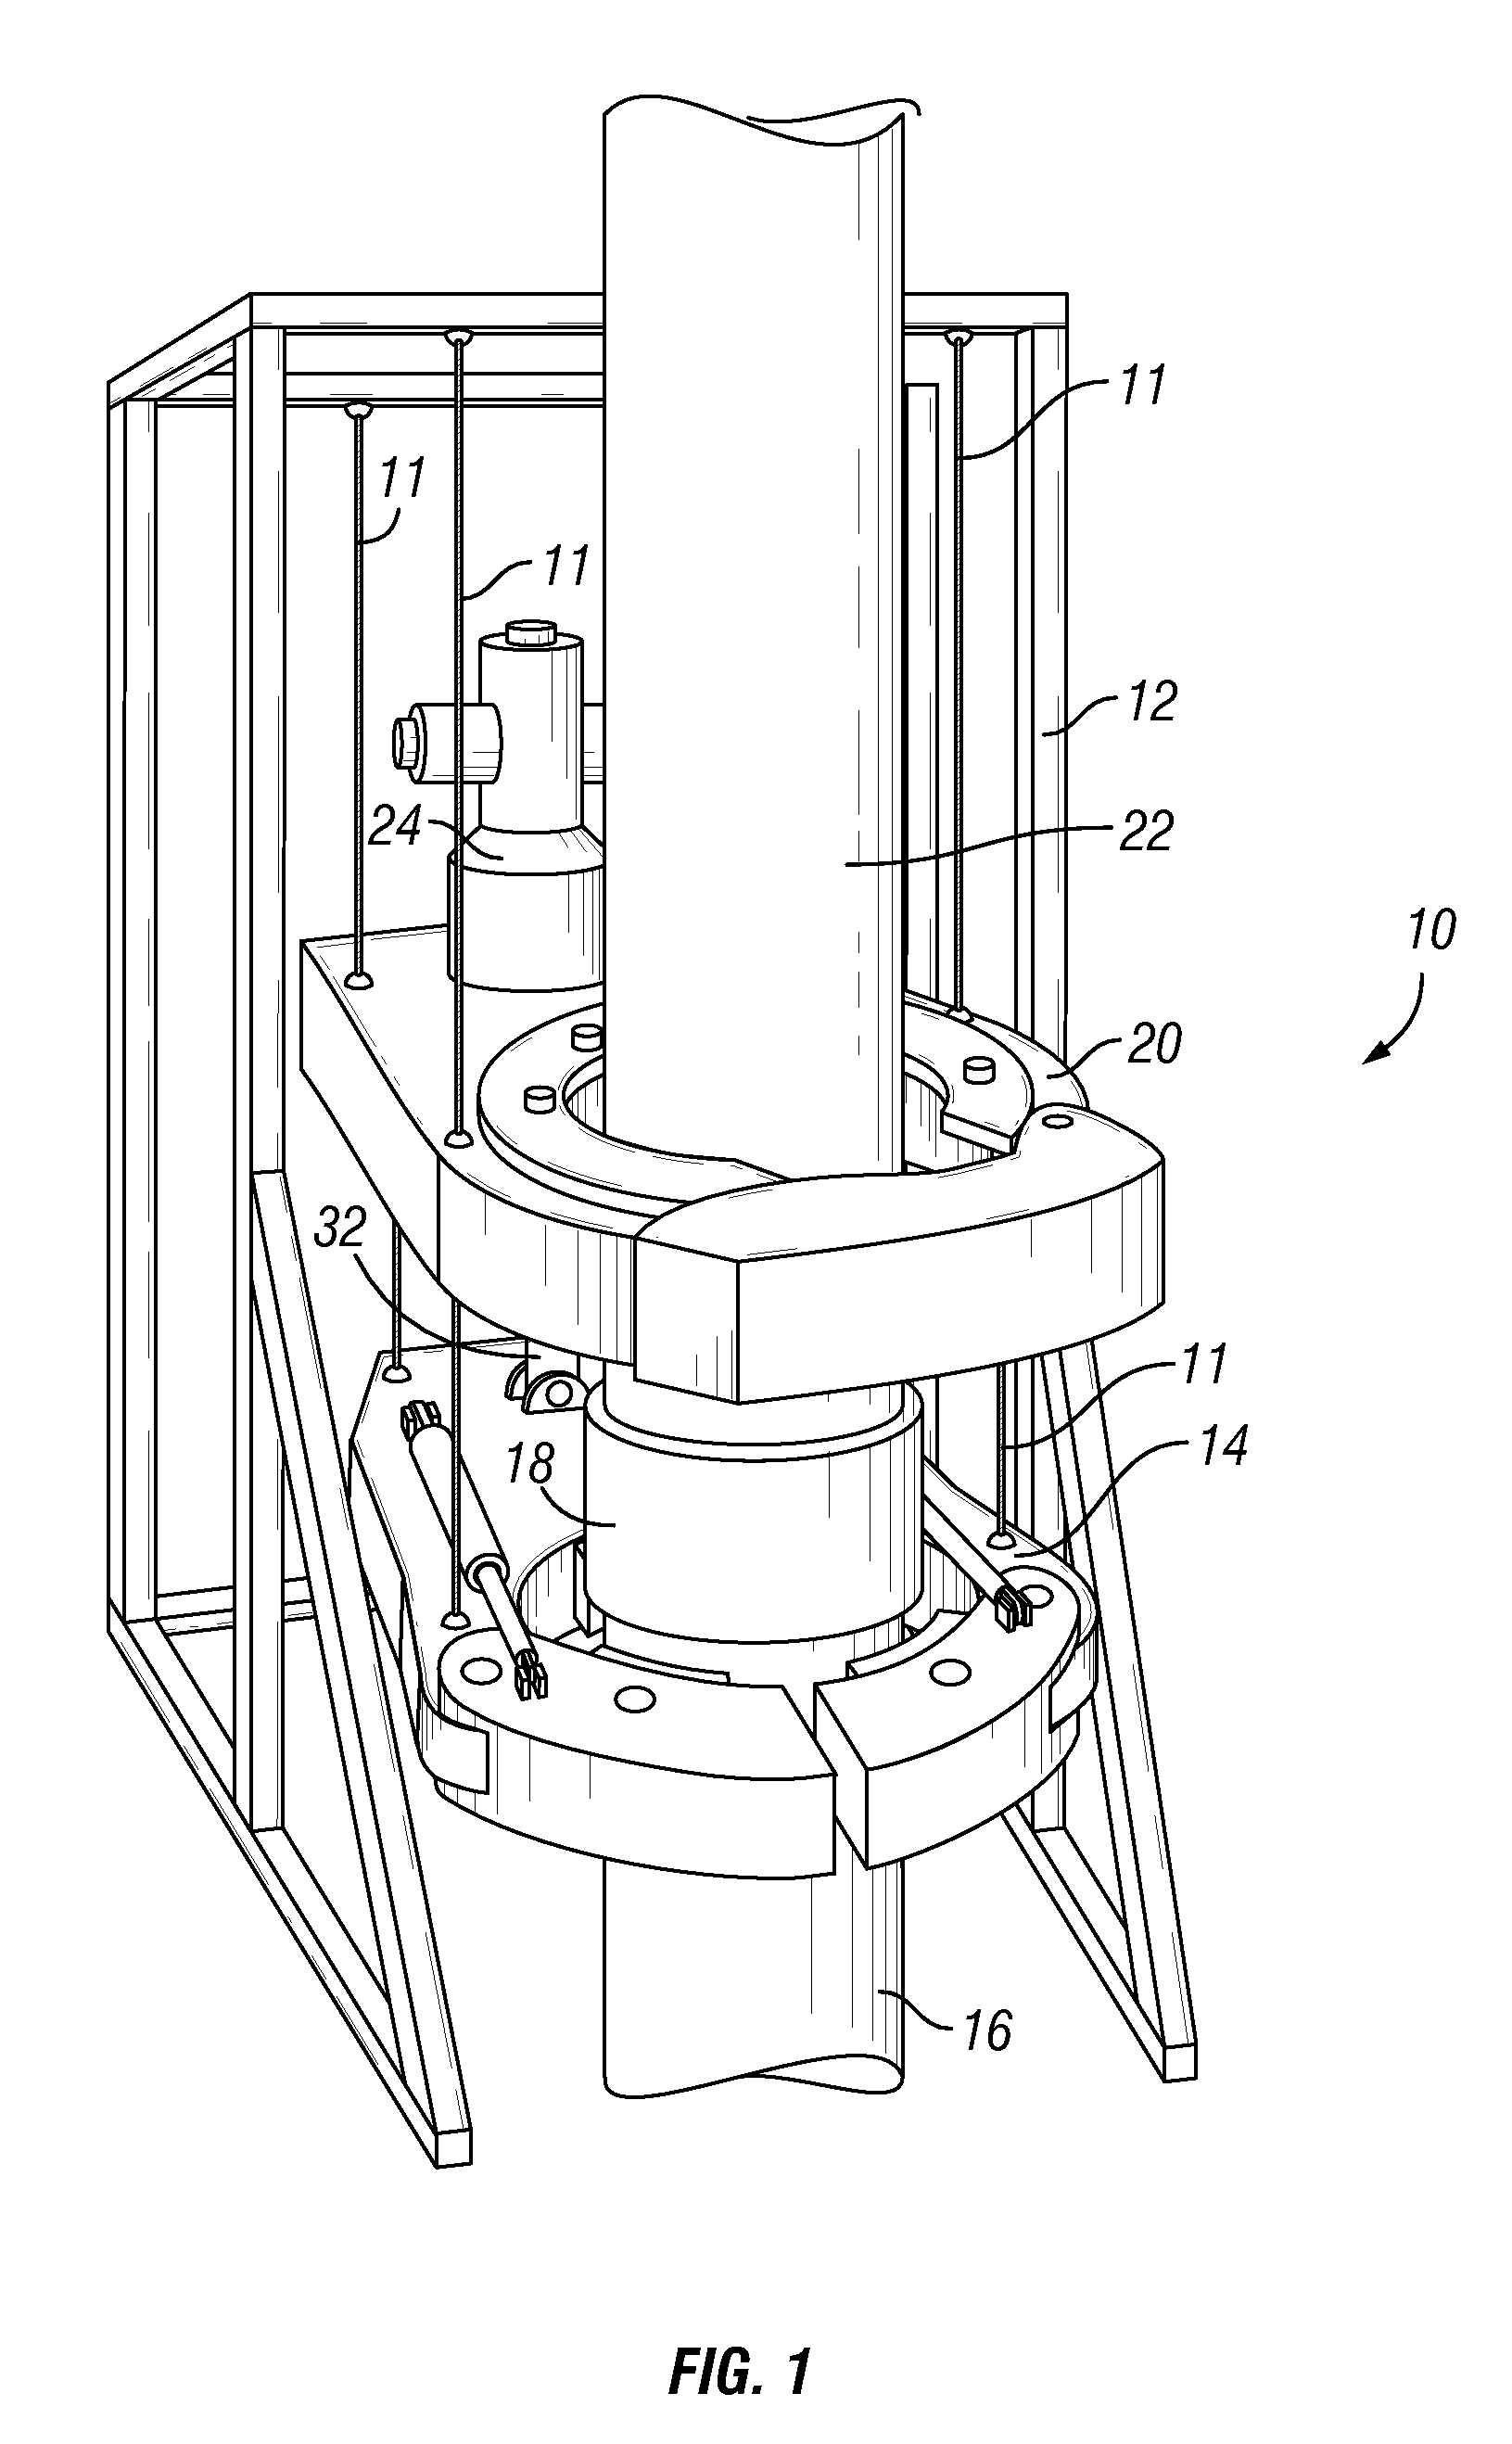 Slippage sensor and method of operating an integrated power tong and back-up tong